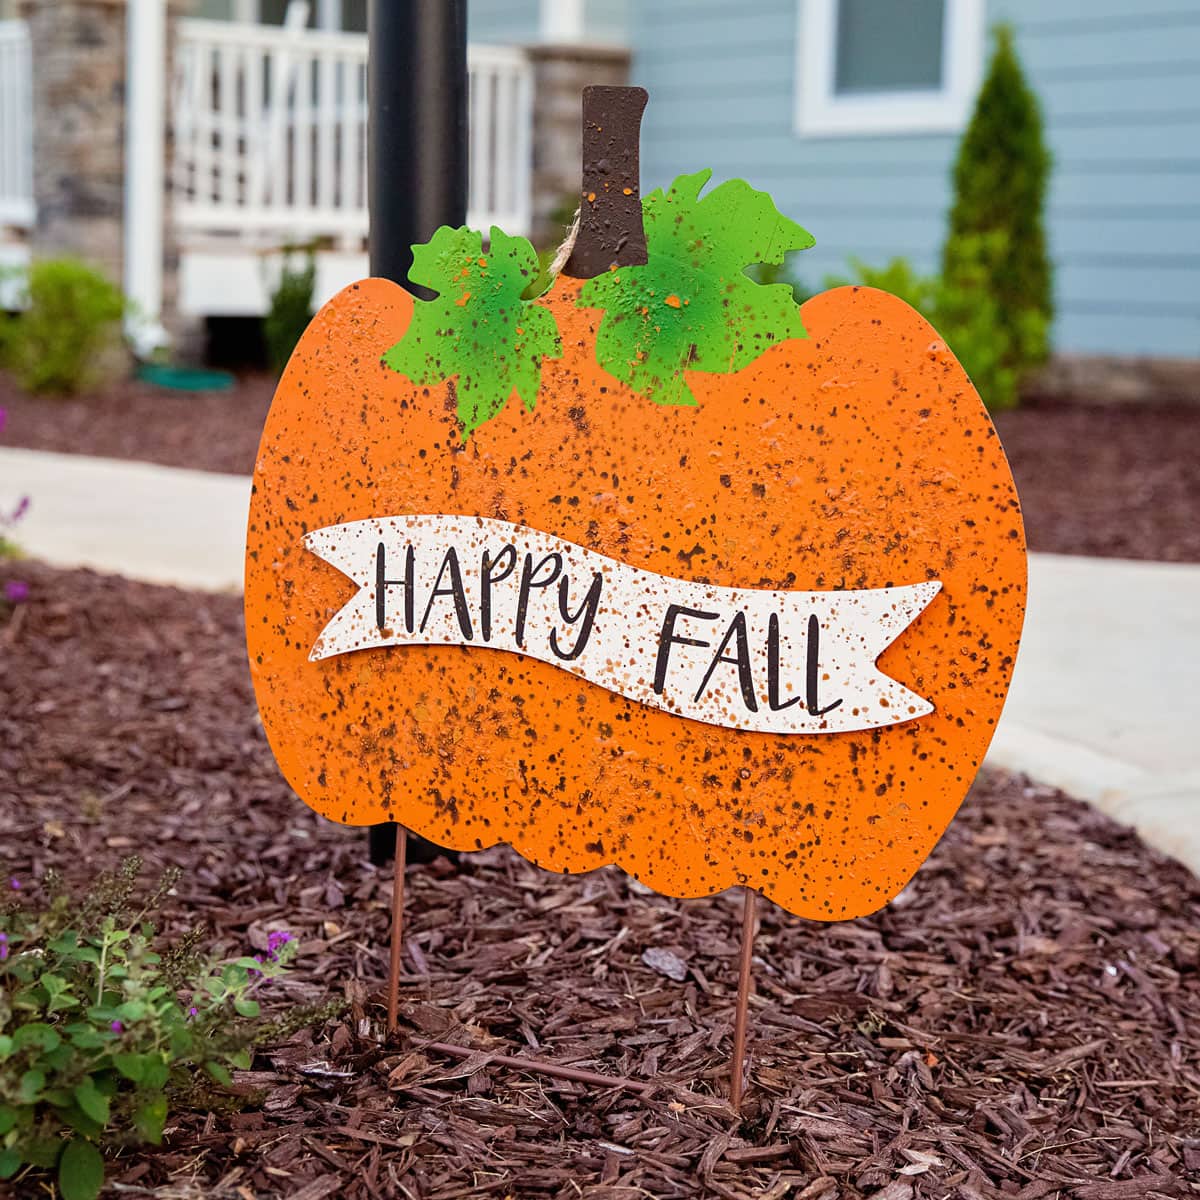 The Season's Best In Fall Home Décor & Fall Decorations » Read Now!